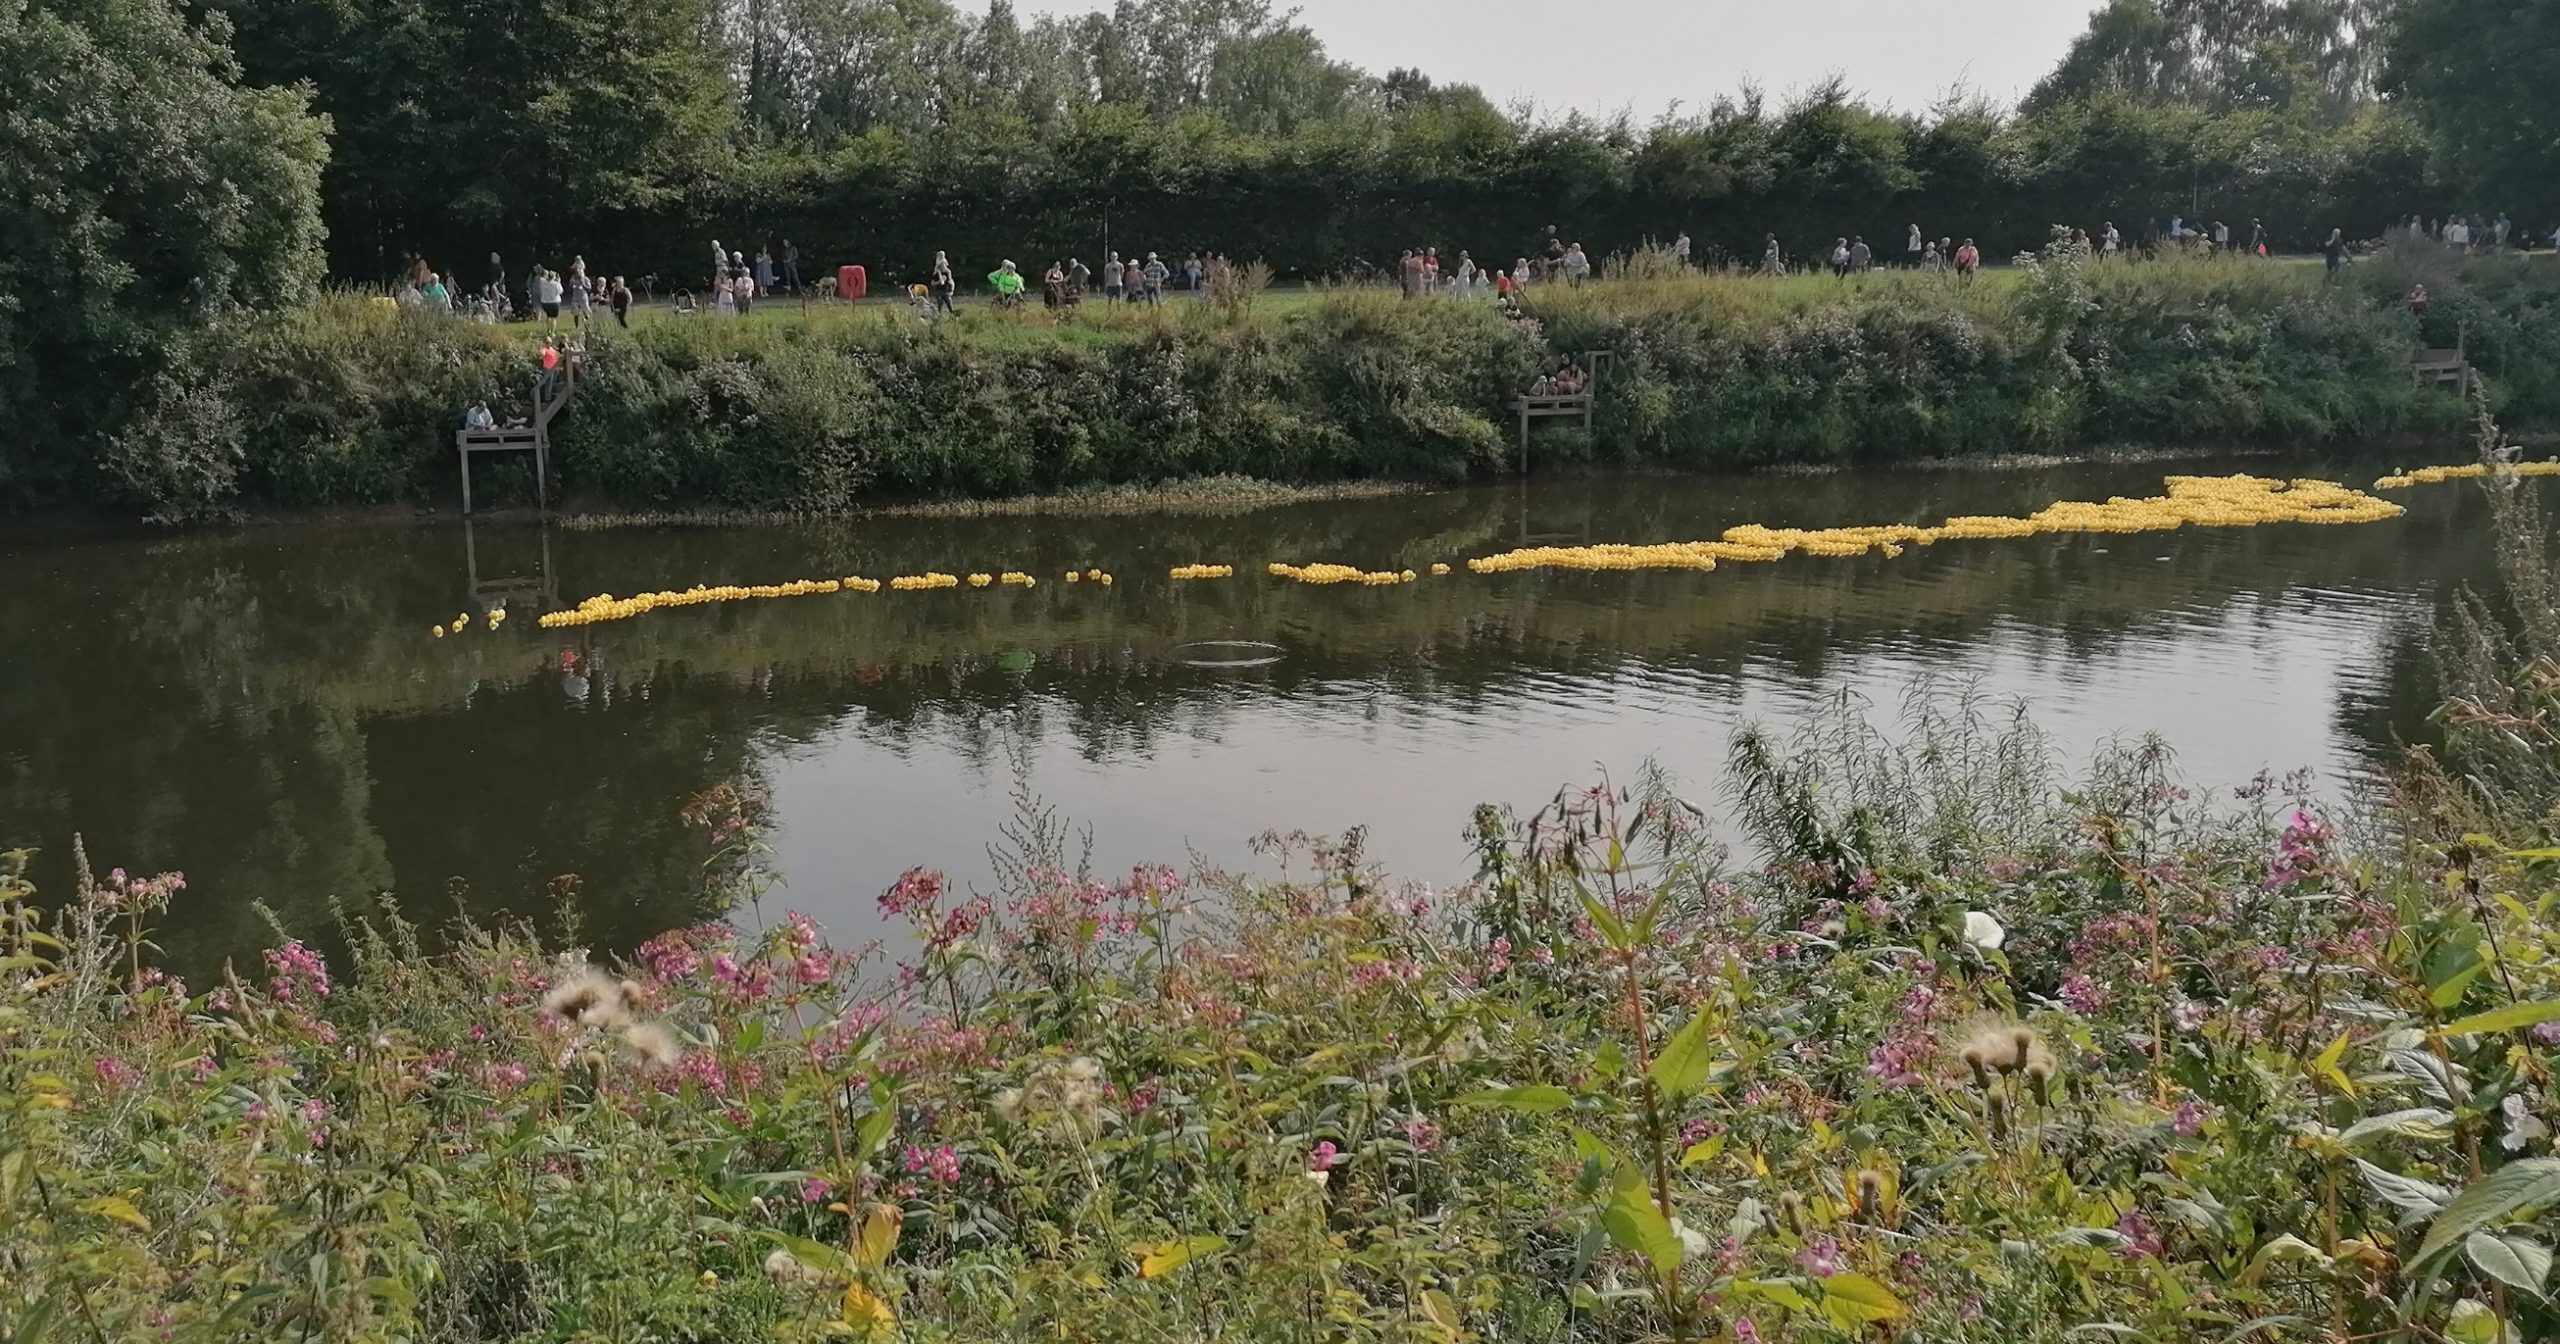 NEWS | City of Hereford Rotary Club’s Duck Race raises nearly £13,000 for local and international charities